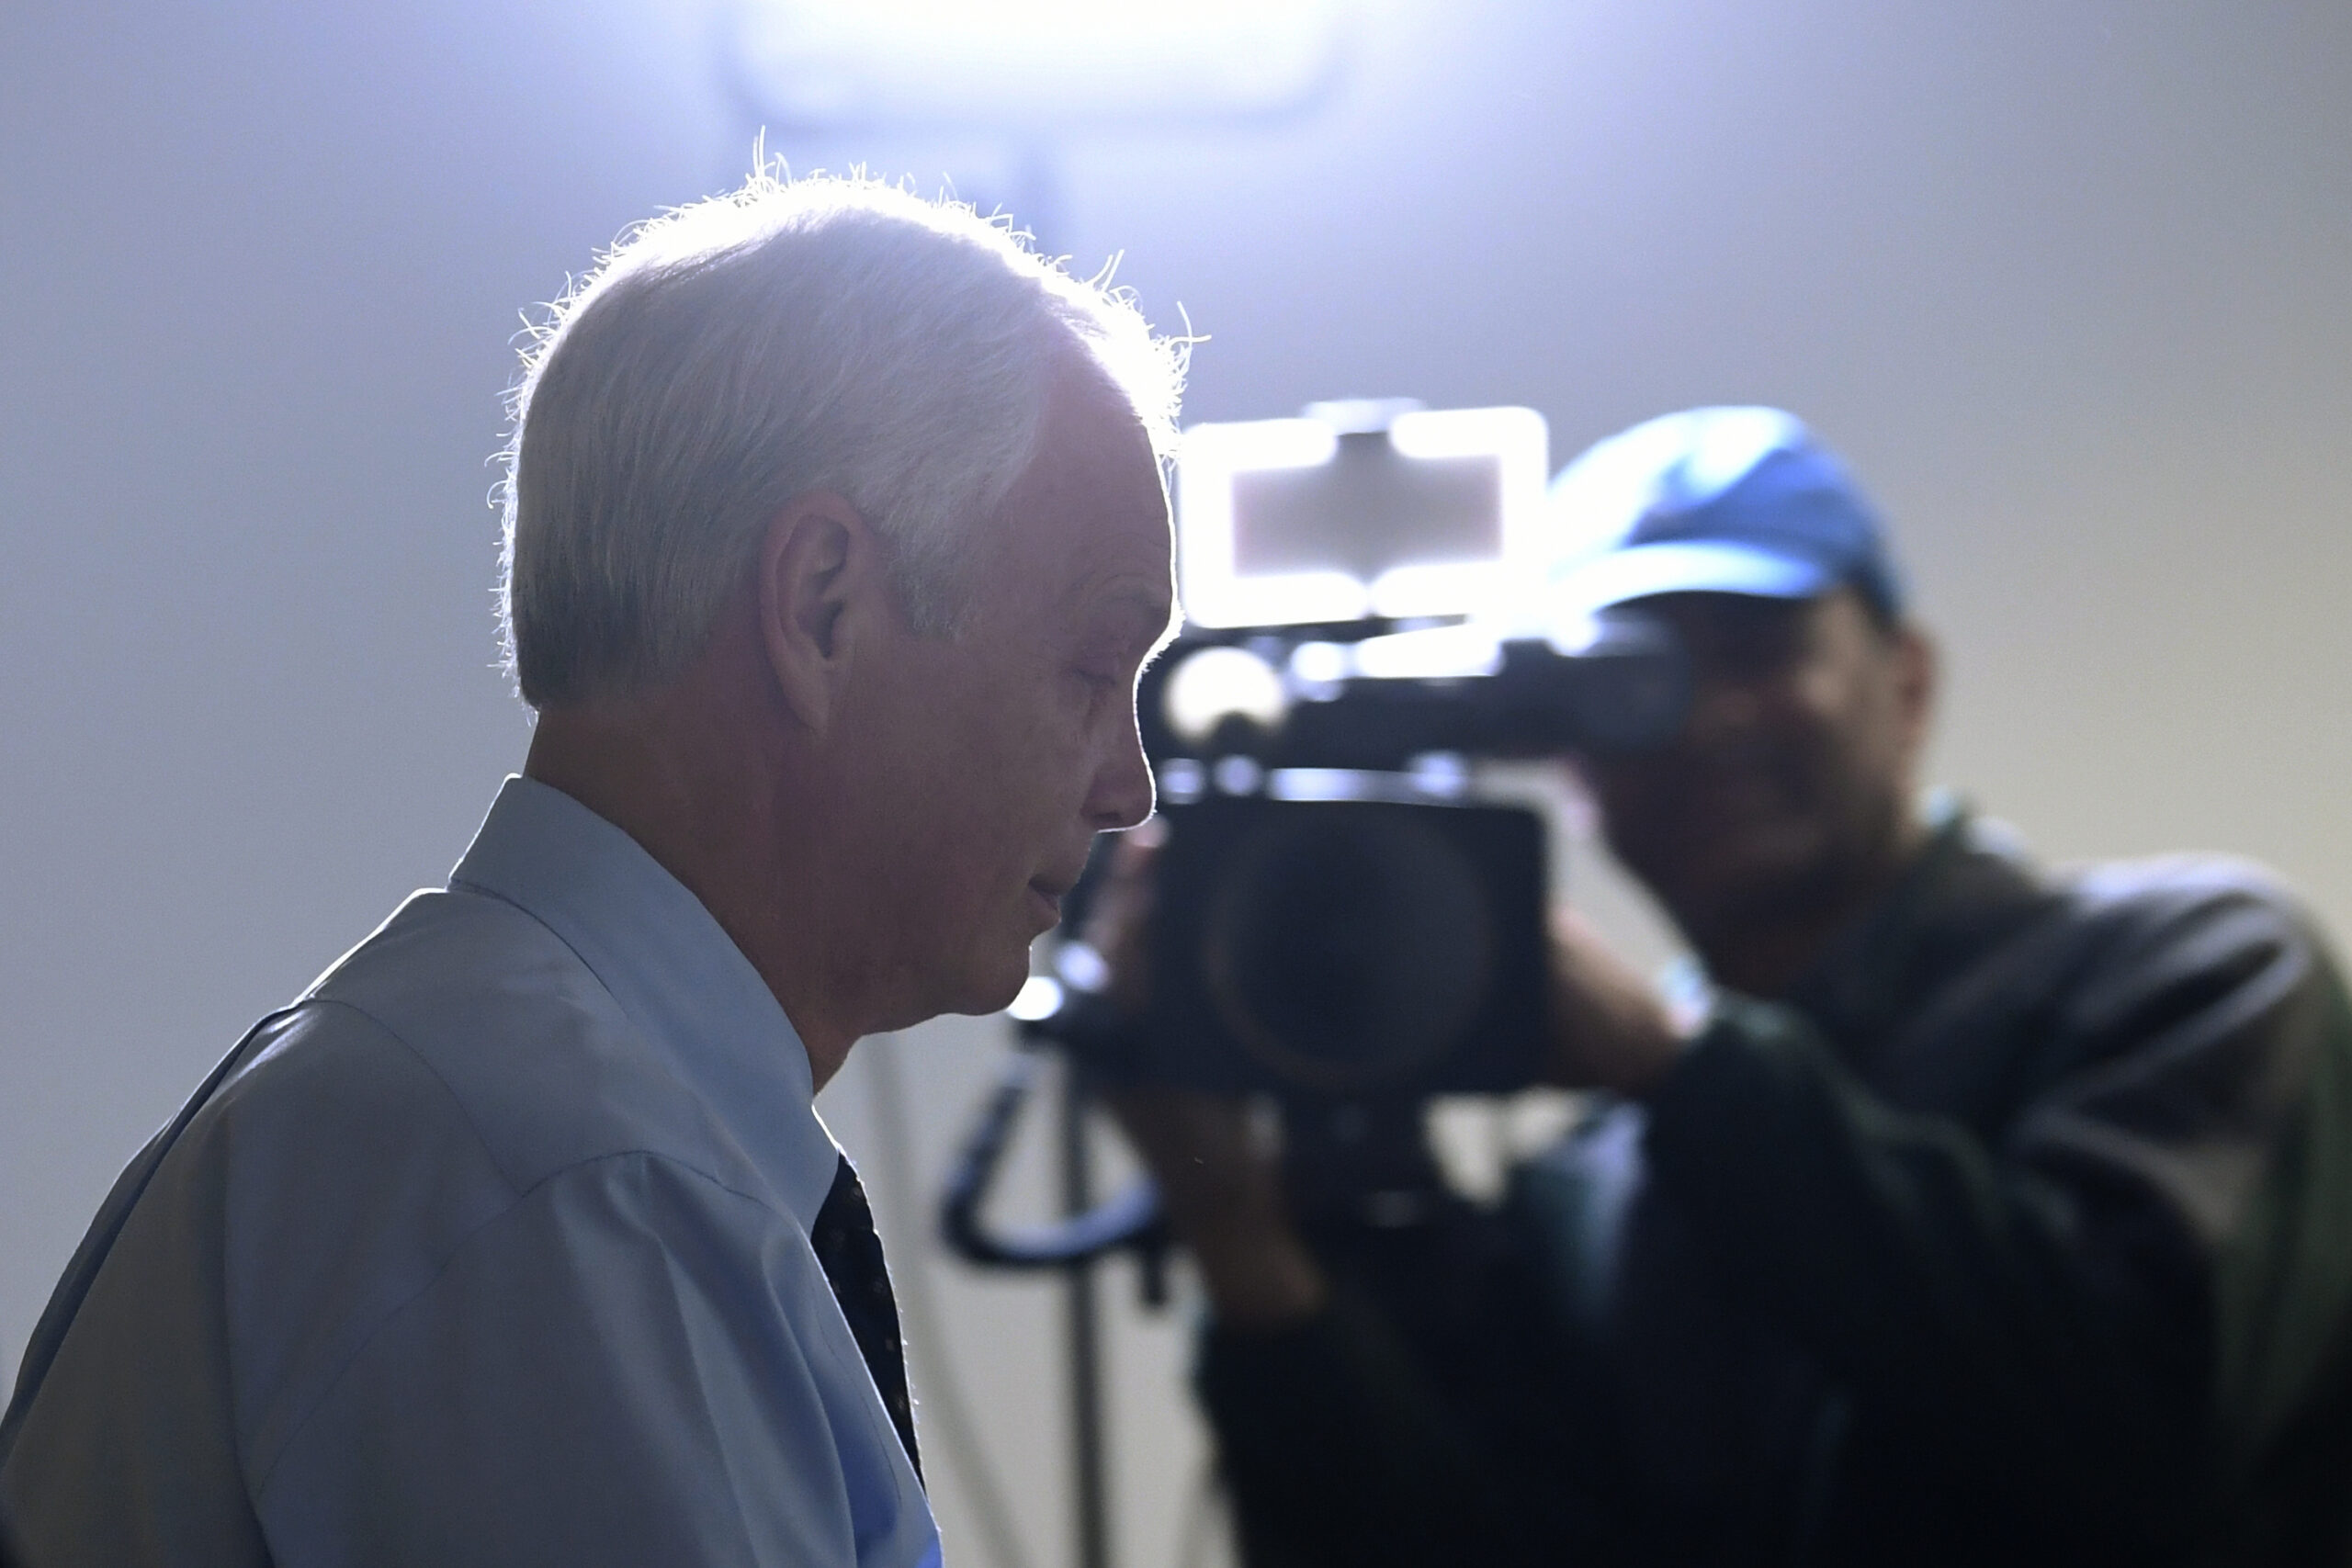 Sen. Ron Johnson, R-Wis., walks past reporters after attending a Republican policy lunch on Capitol Hill in Washington, Thursday, March 19, 2020